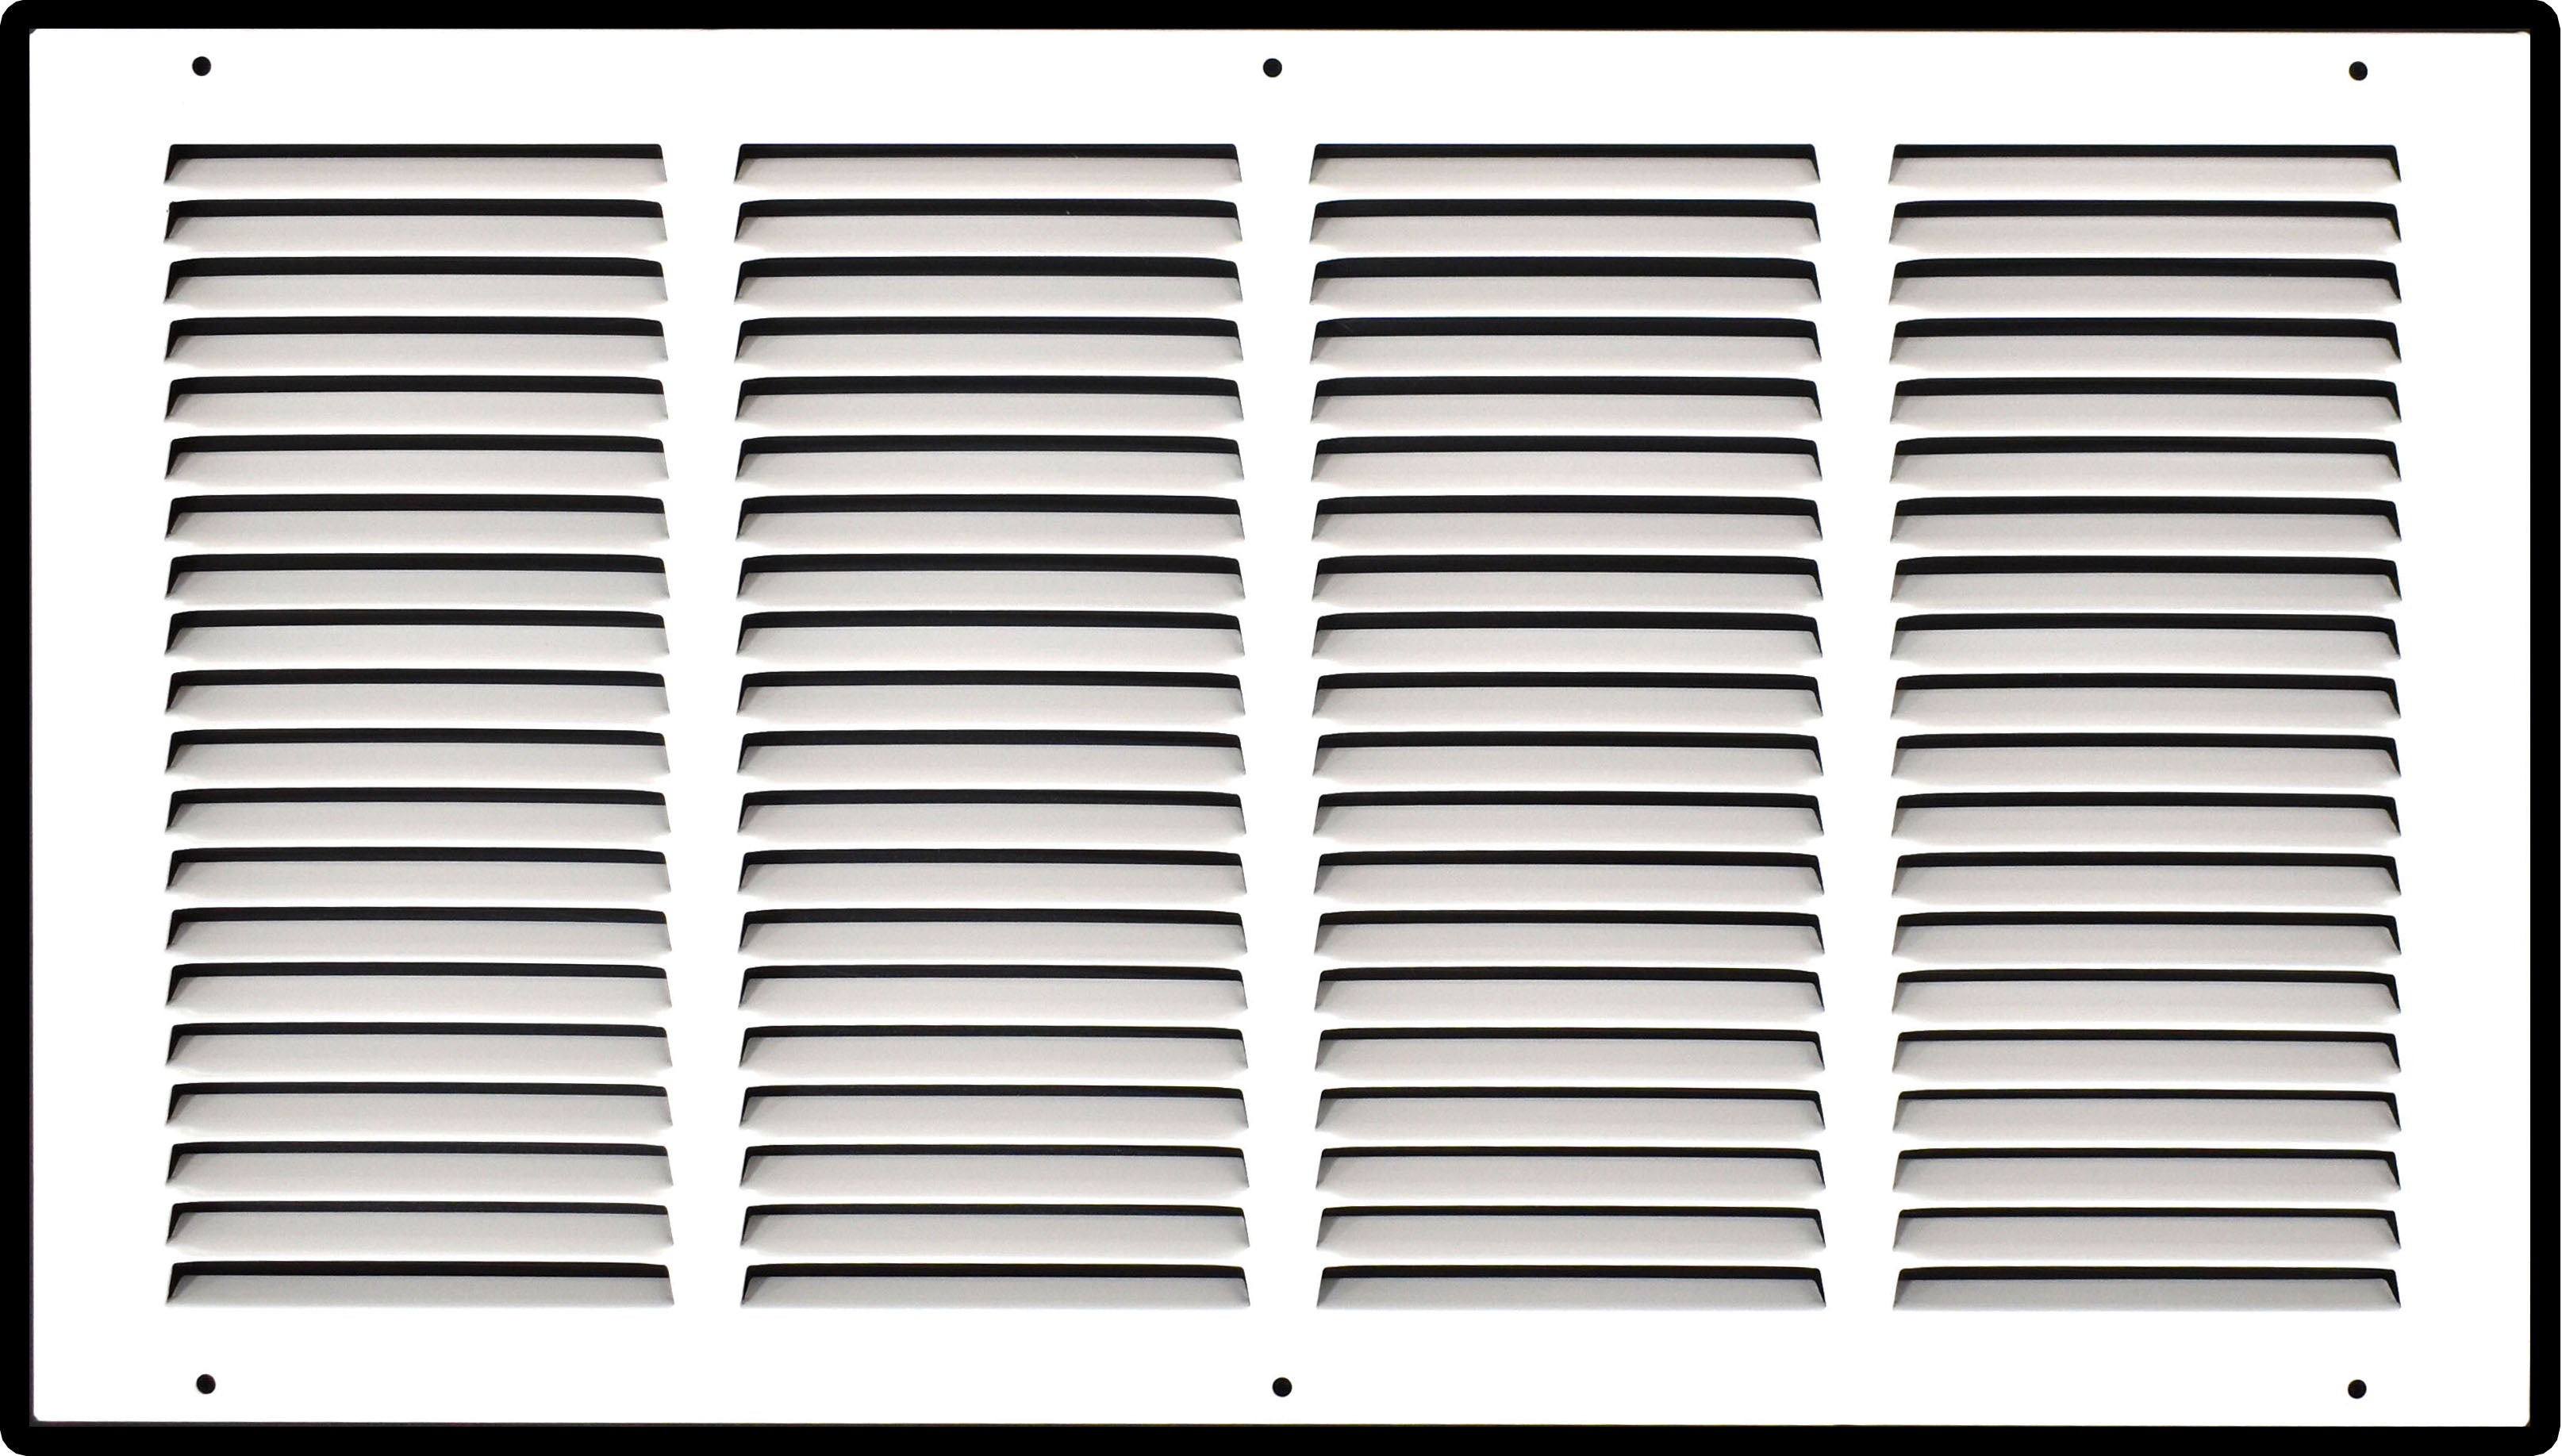 airgrilles 20" x 10" duct opening   hd steel return air grille for sidewall and ceiling  agc  7agc-flt-wh-20x10 756014649598 - 1